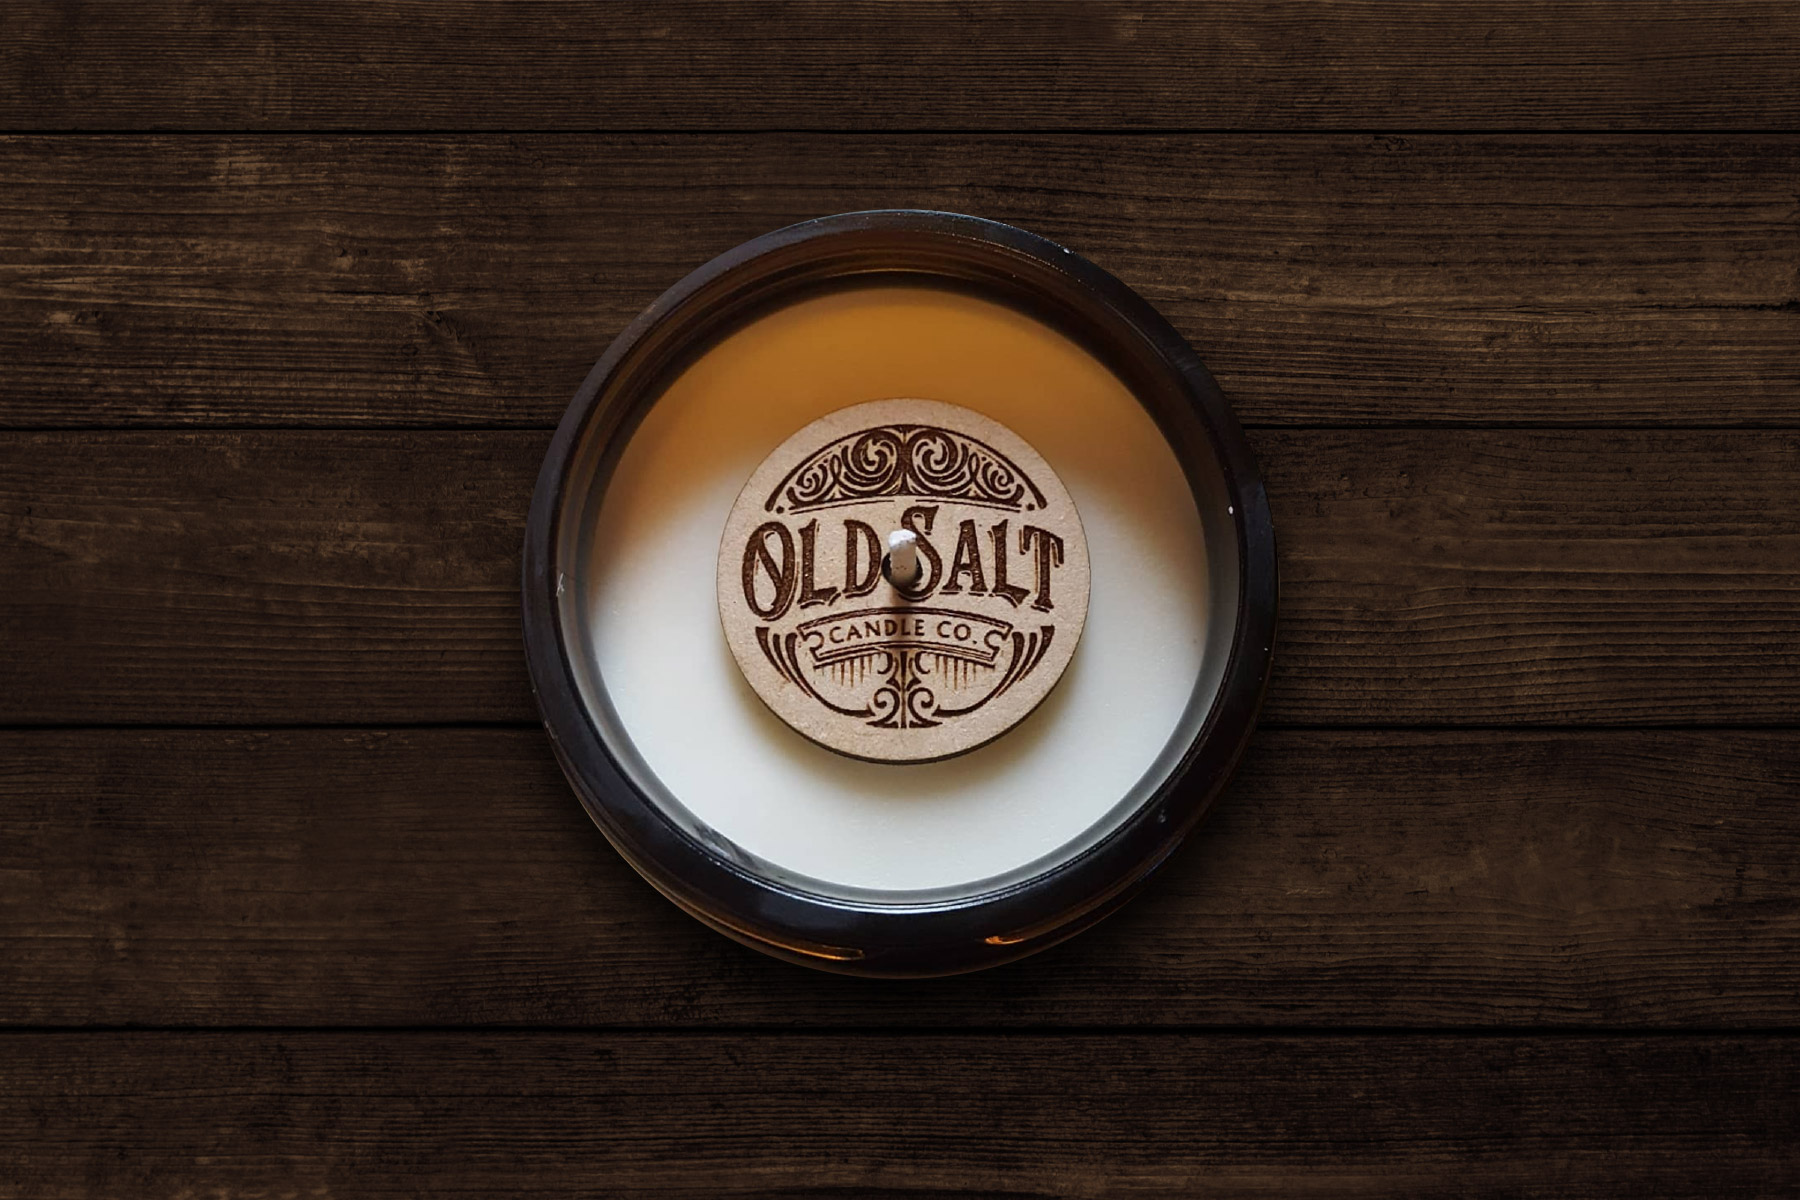 wooden coin with old salt logo on top of candle